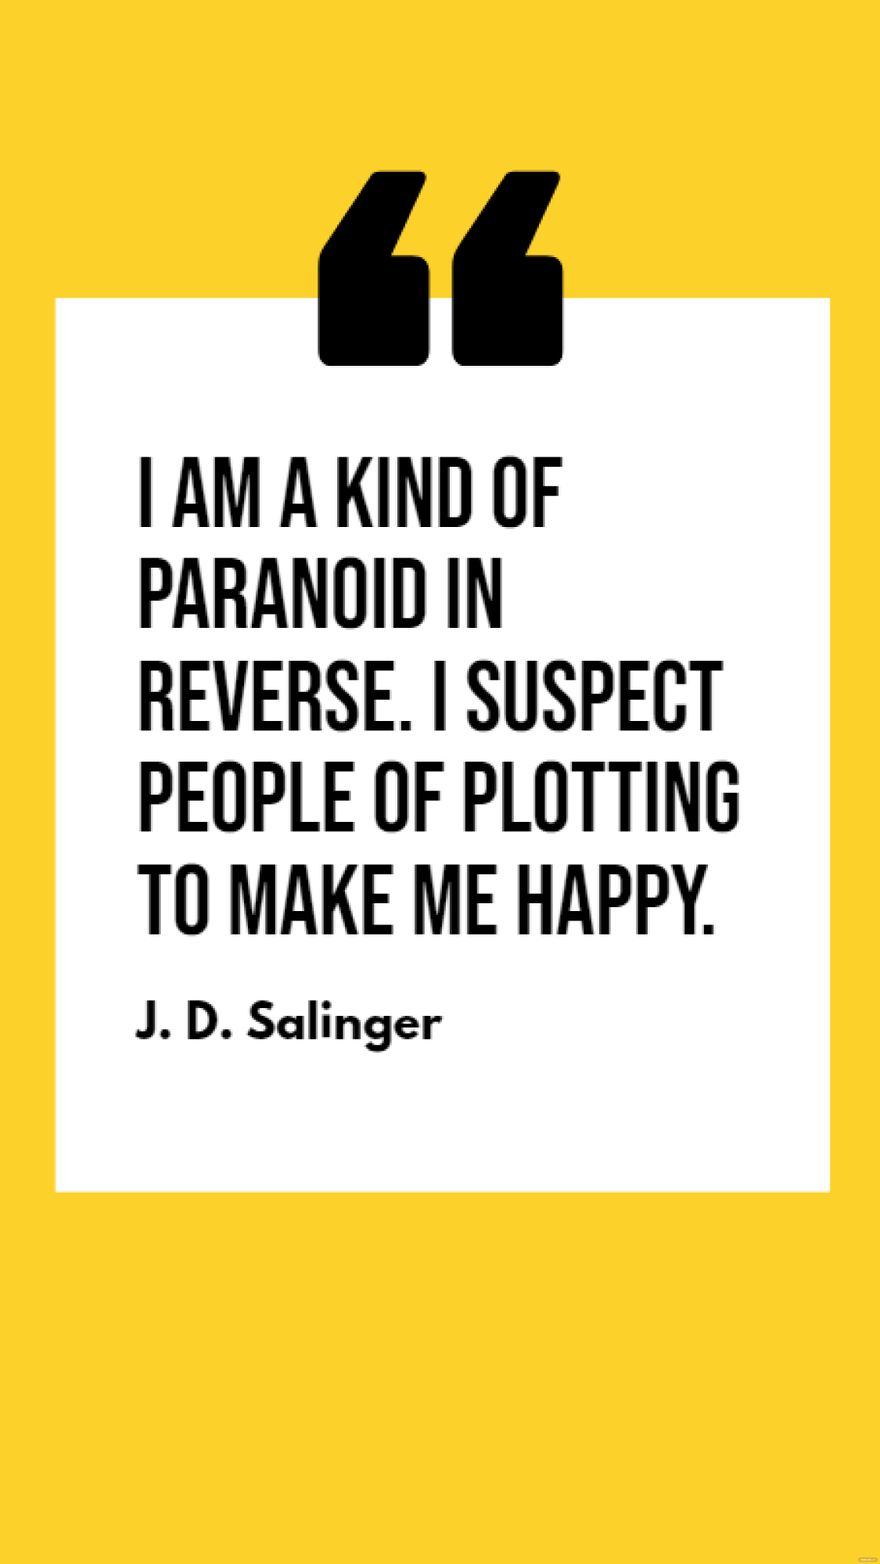 Free J. D. Salinger - I am a kind of paranoid in reverse. I suspect people of plotting to make me happy. in JPG